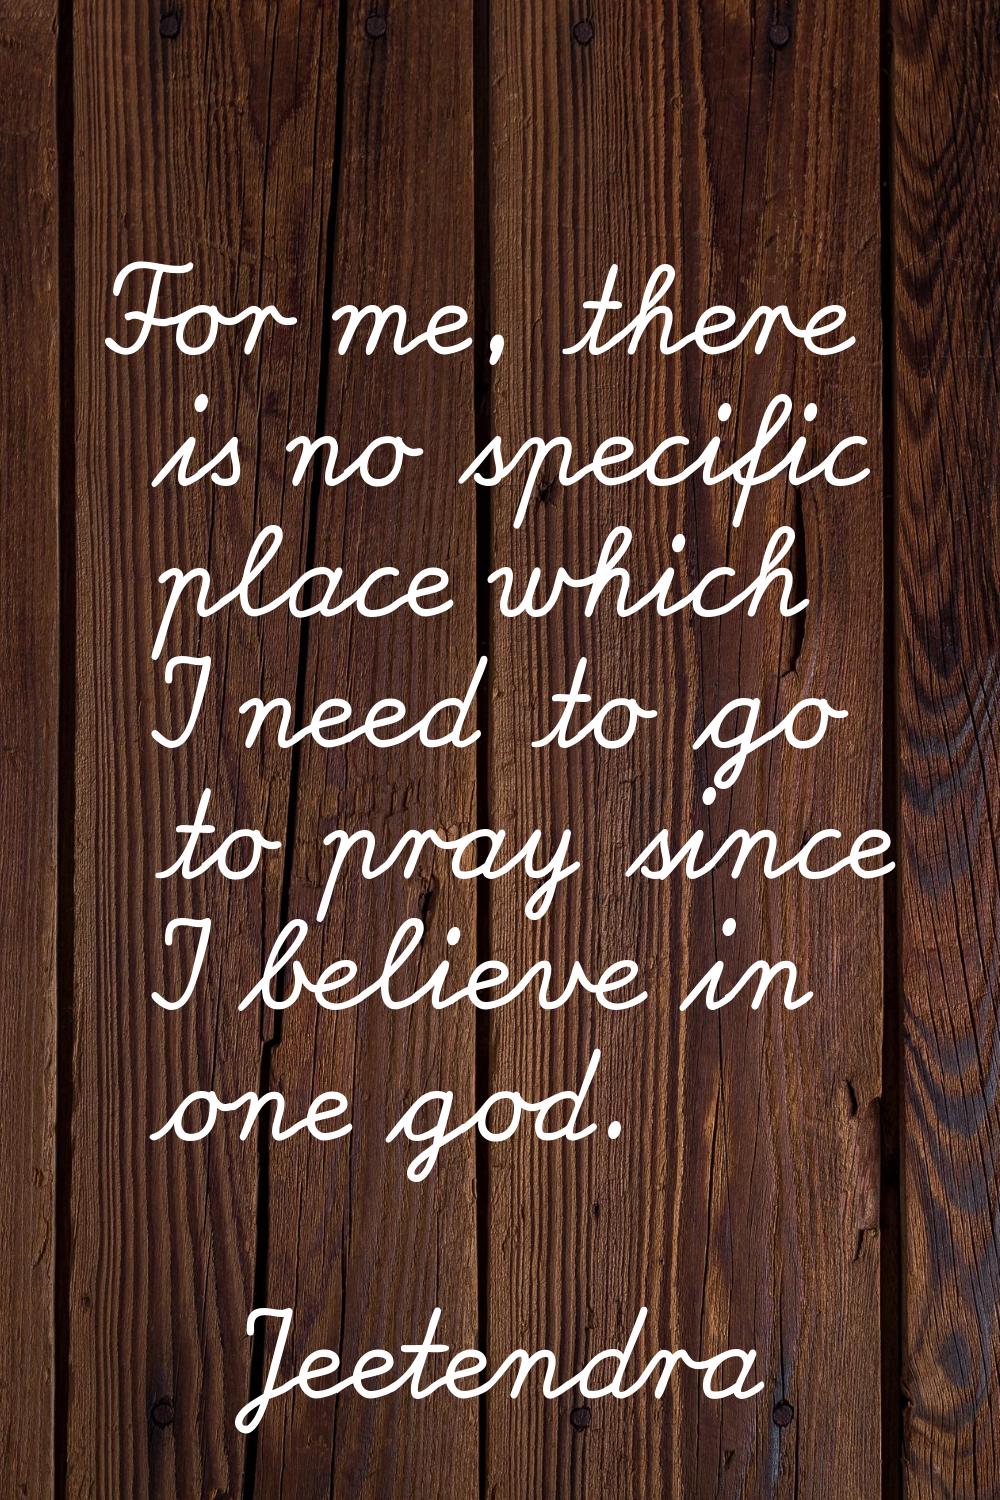 For me, there is no specific place which I need to go to pray since I believe in one god.